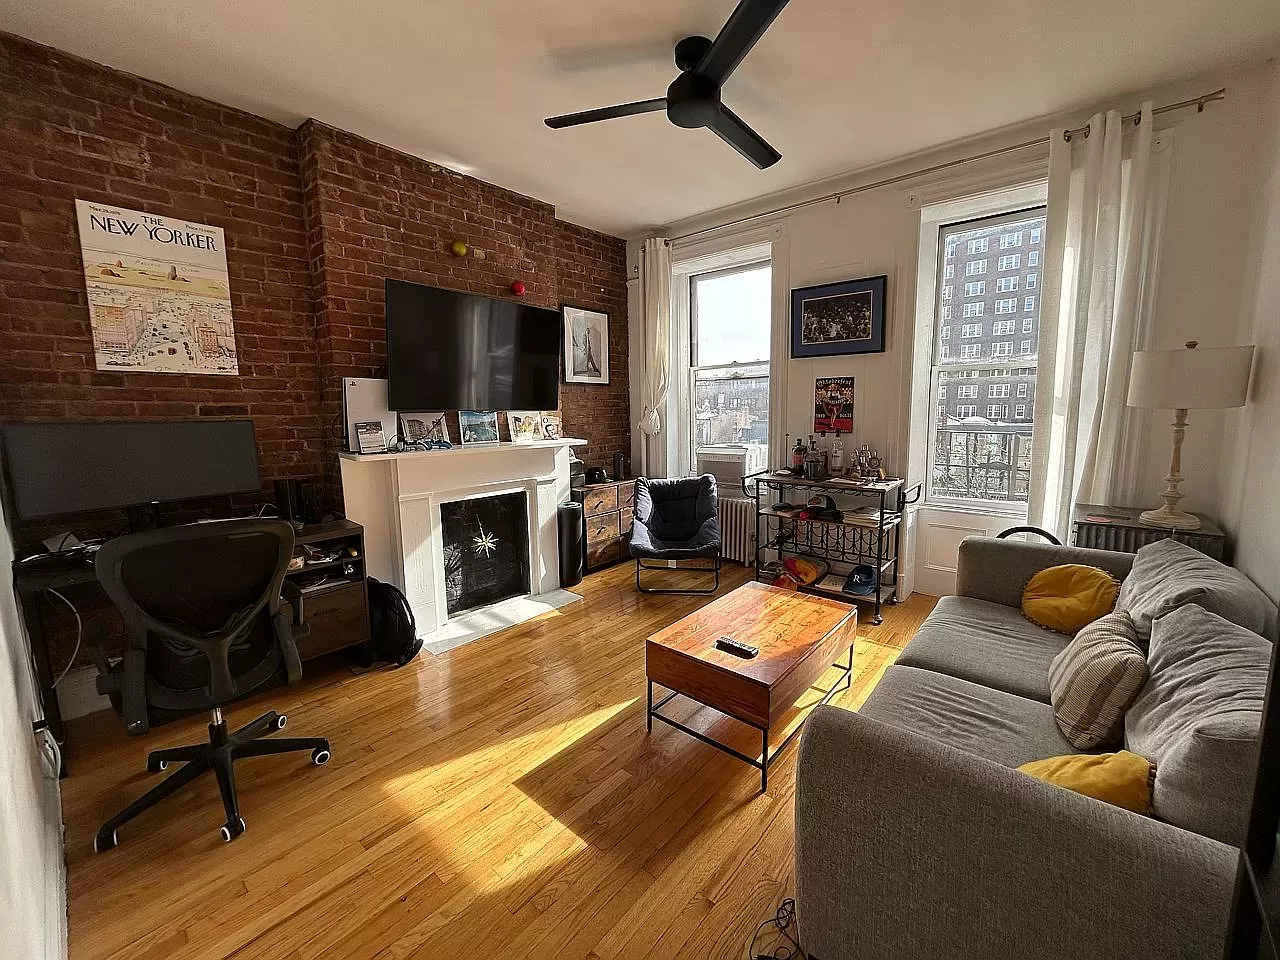 Apartment for Rent in Manhattan West Village, NY